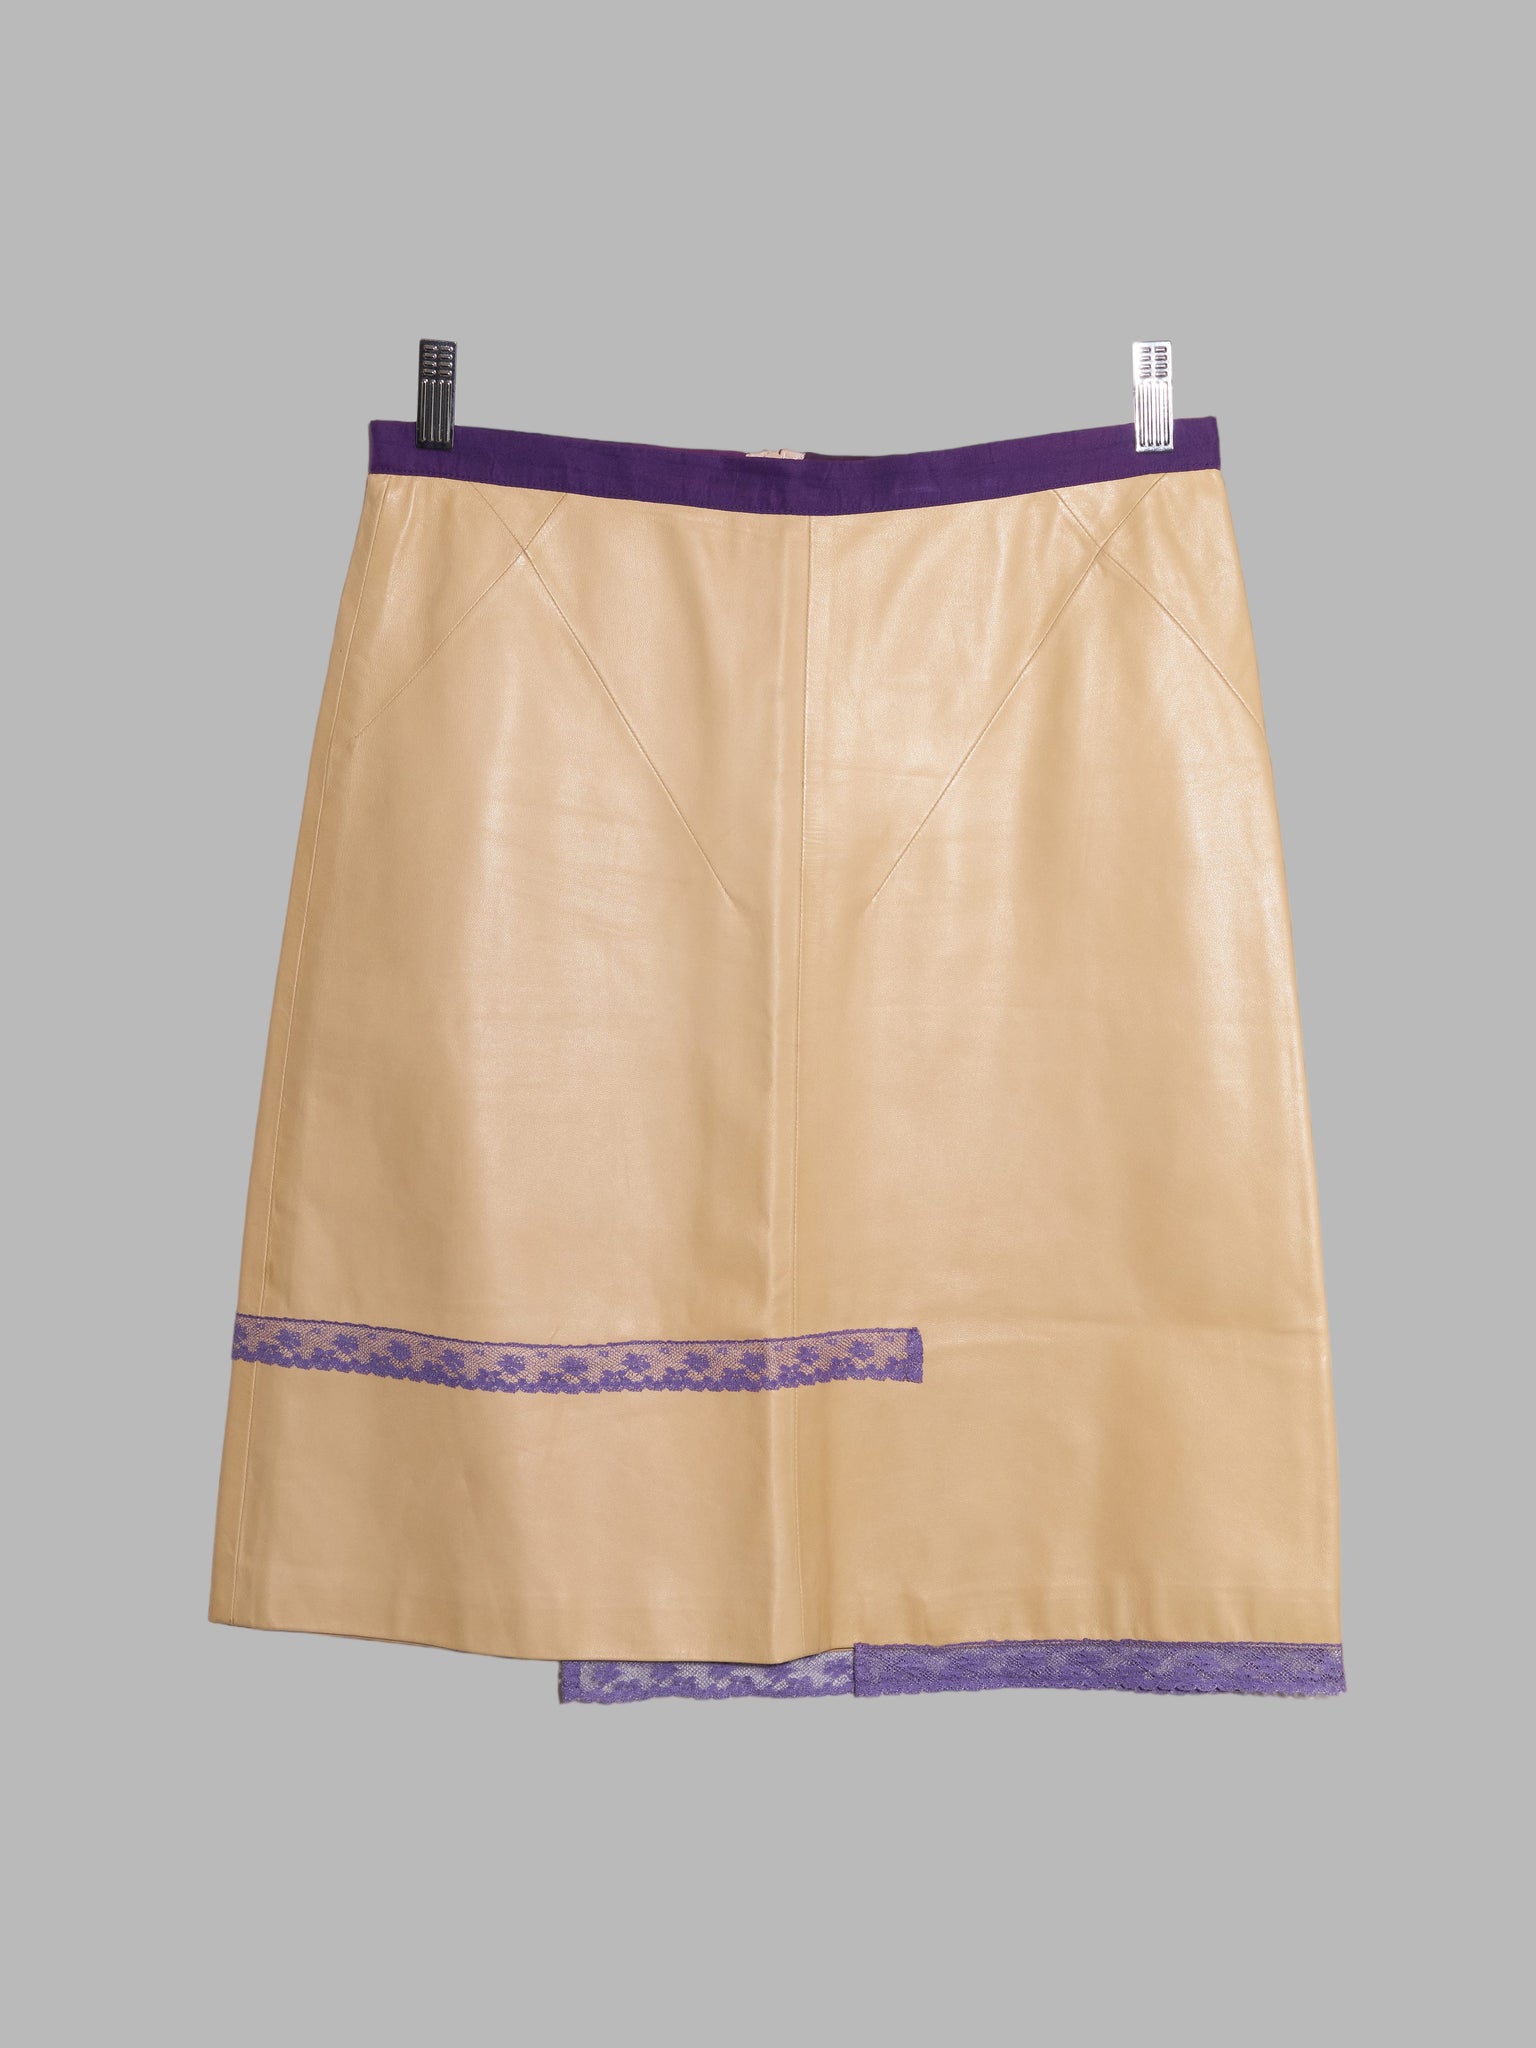 Alessandro Dell’acqua beige leather skirt with purple lace accents - sz 40 IT